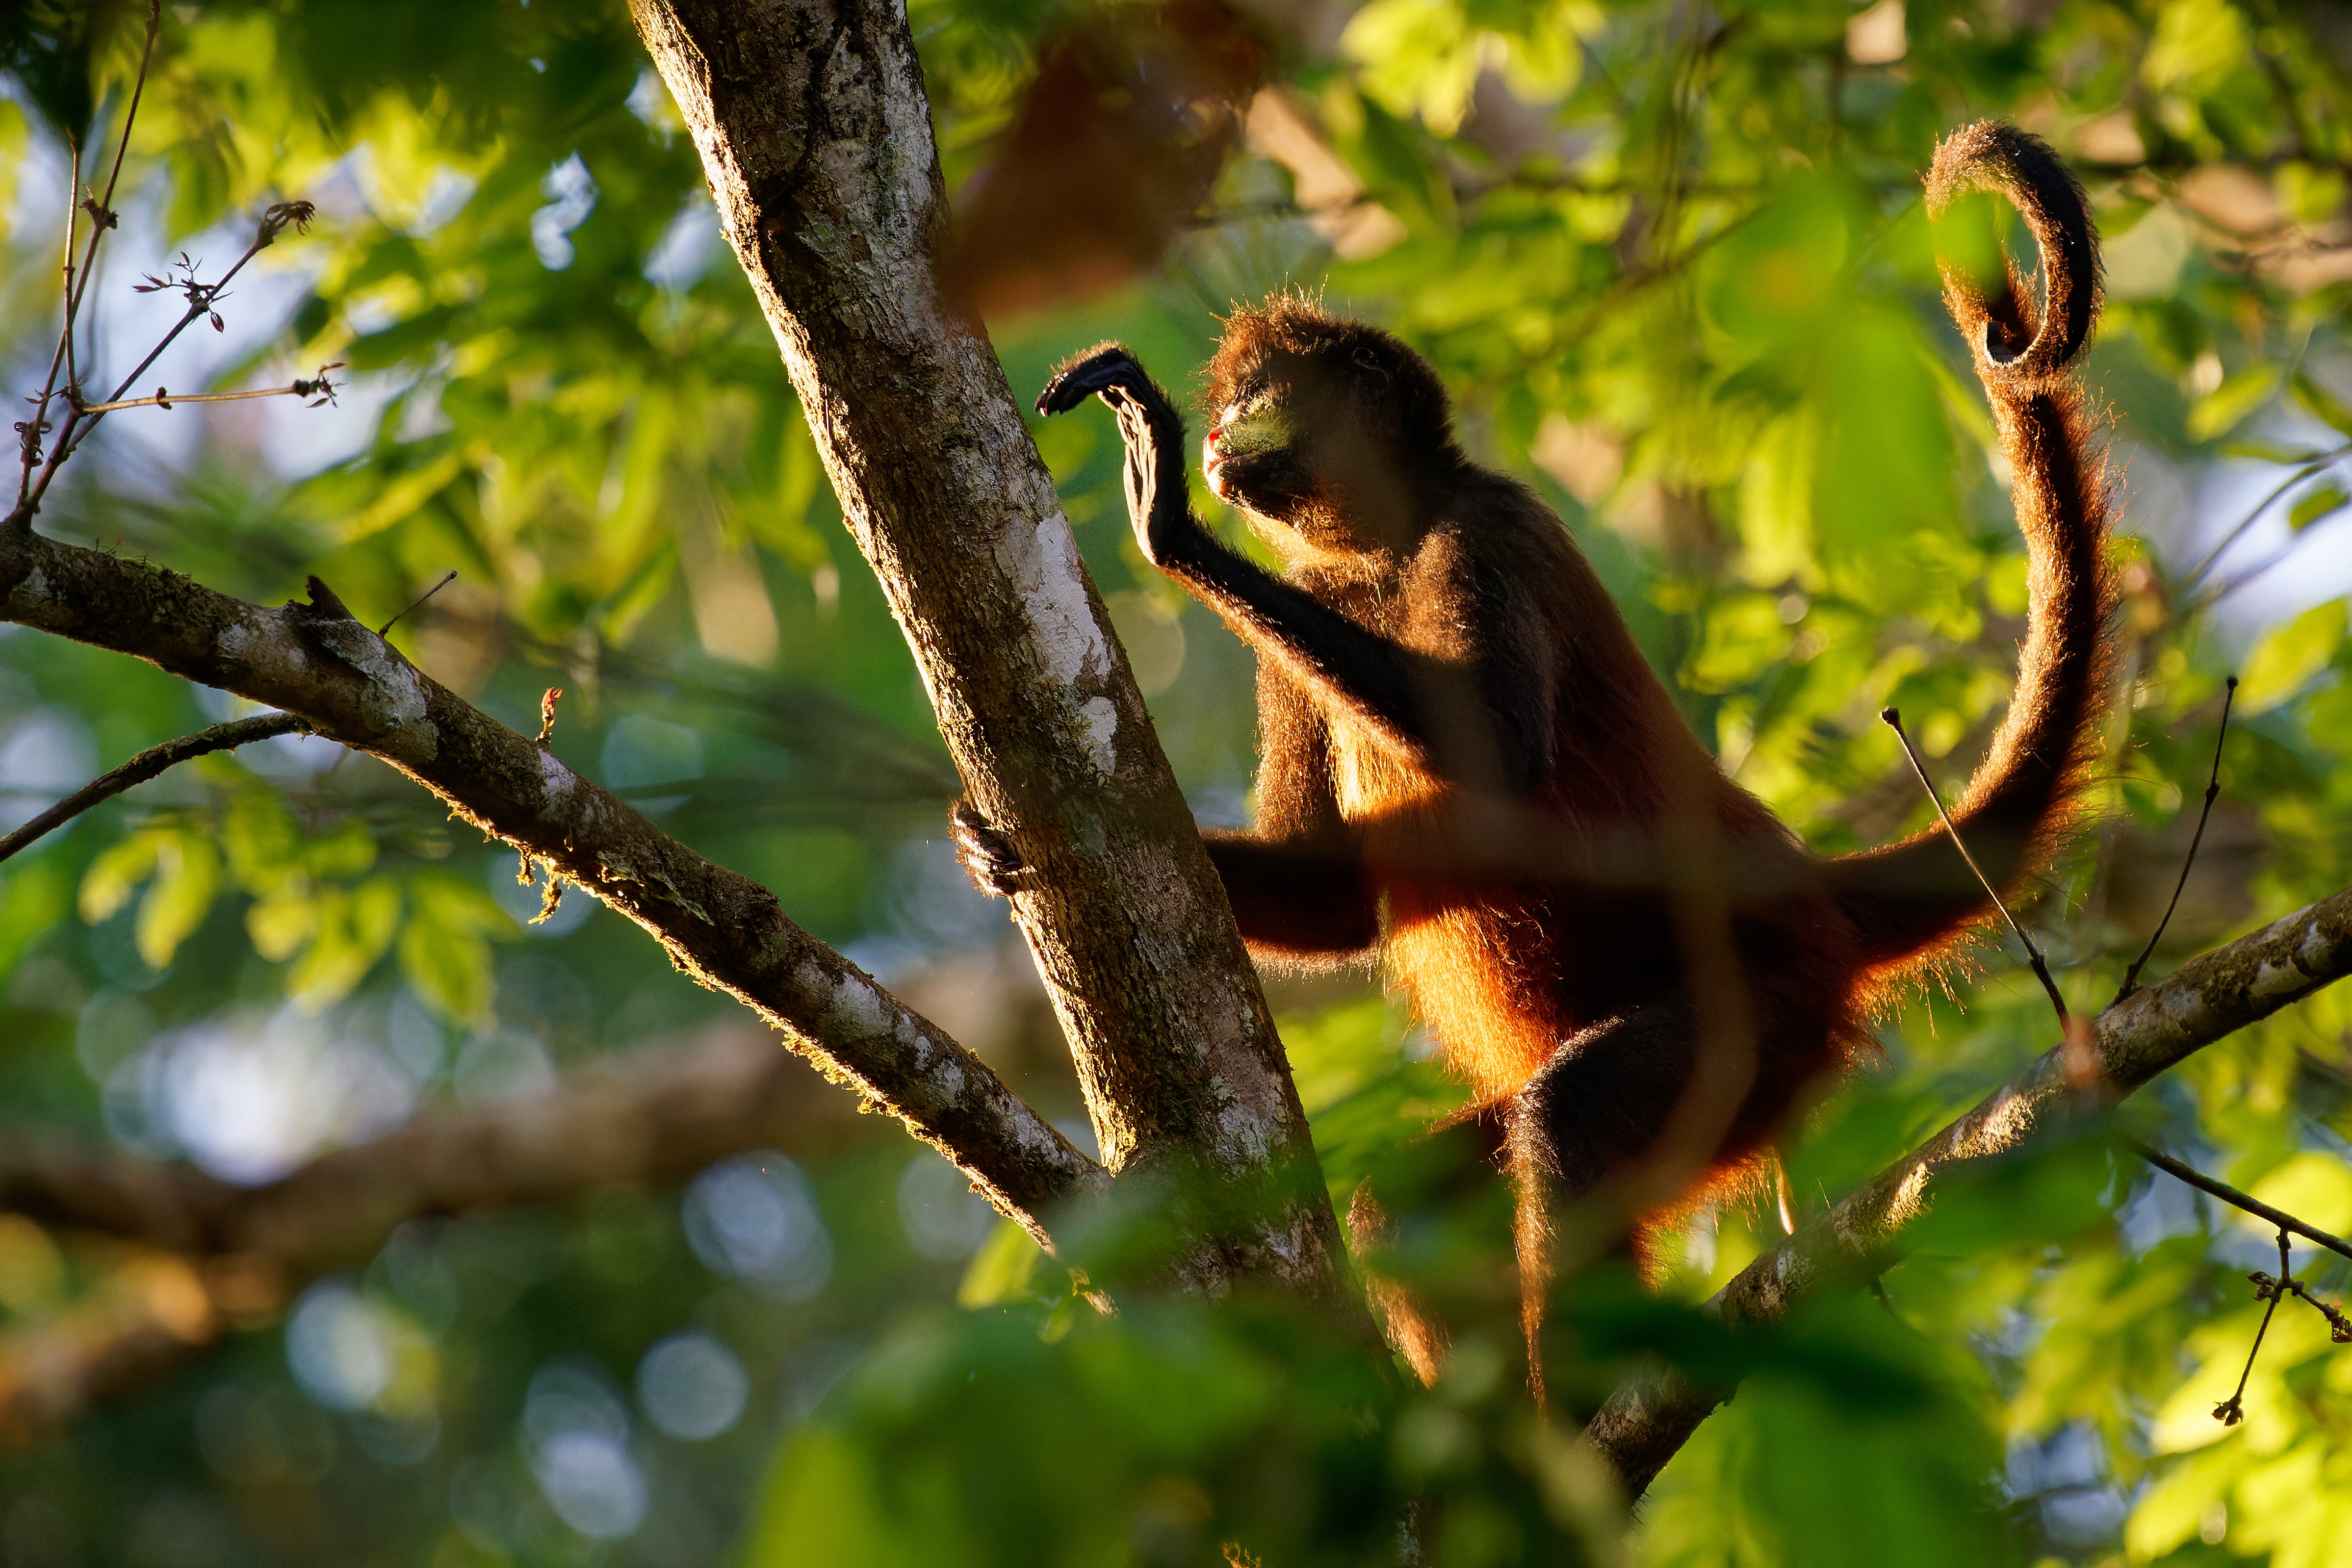 Like spider monkeys, our ancestors’ tails helped them stay balanced in trees